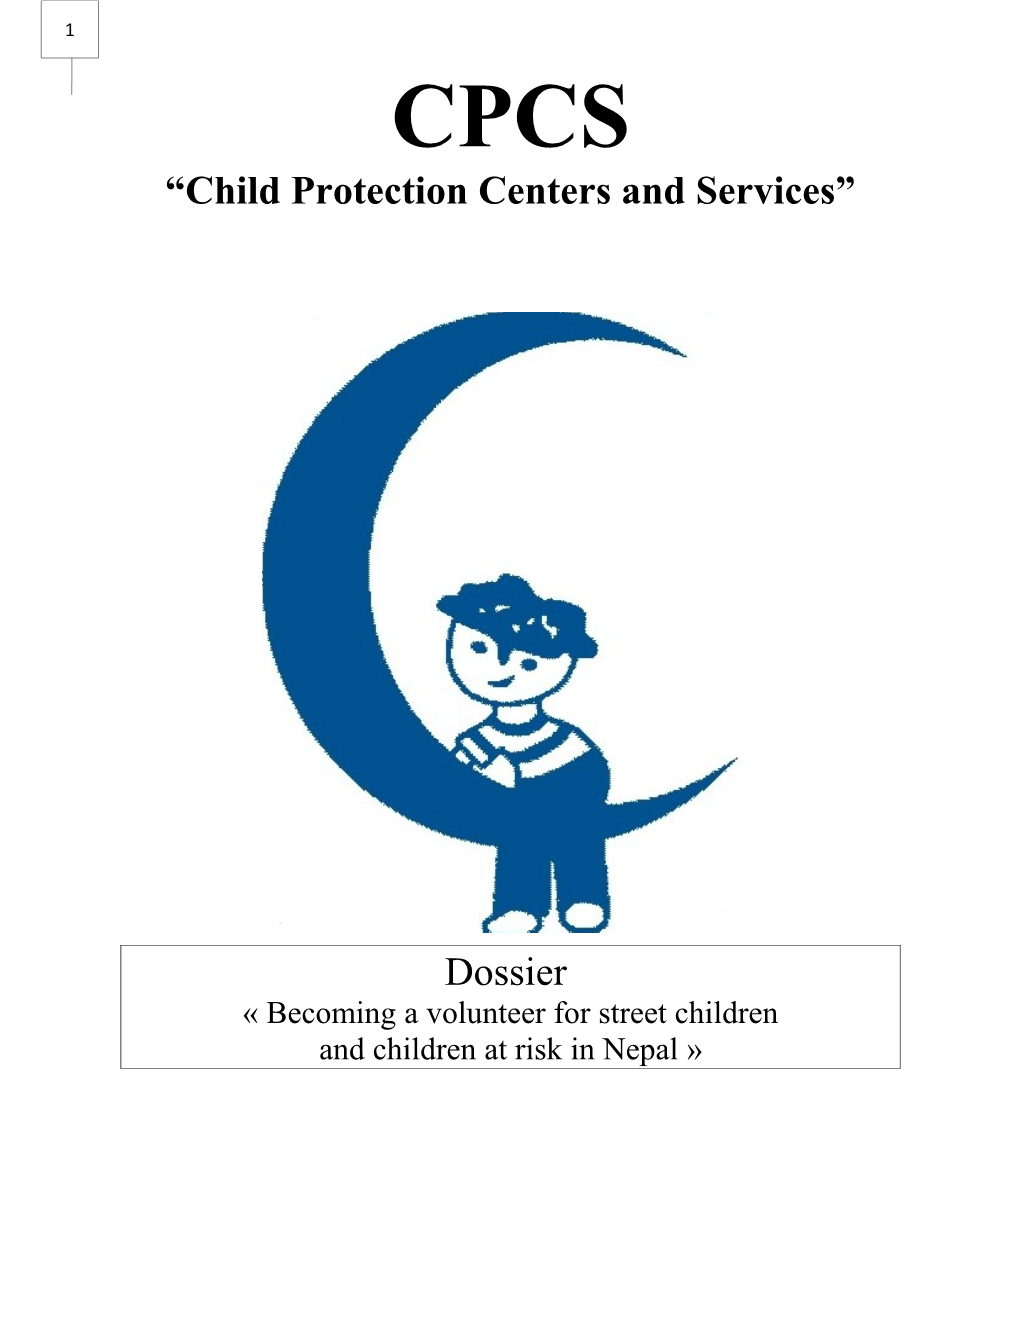 Child Protection Centers and Services